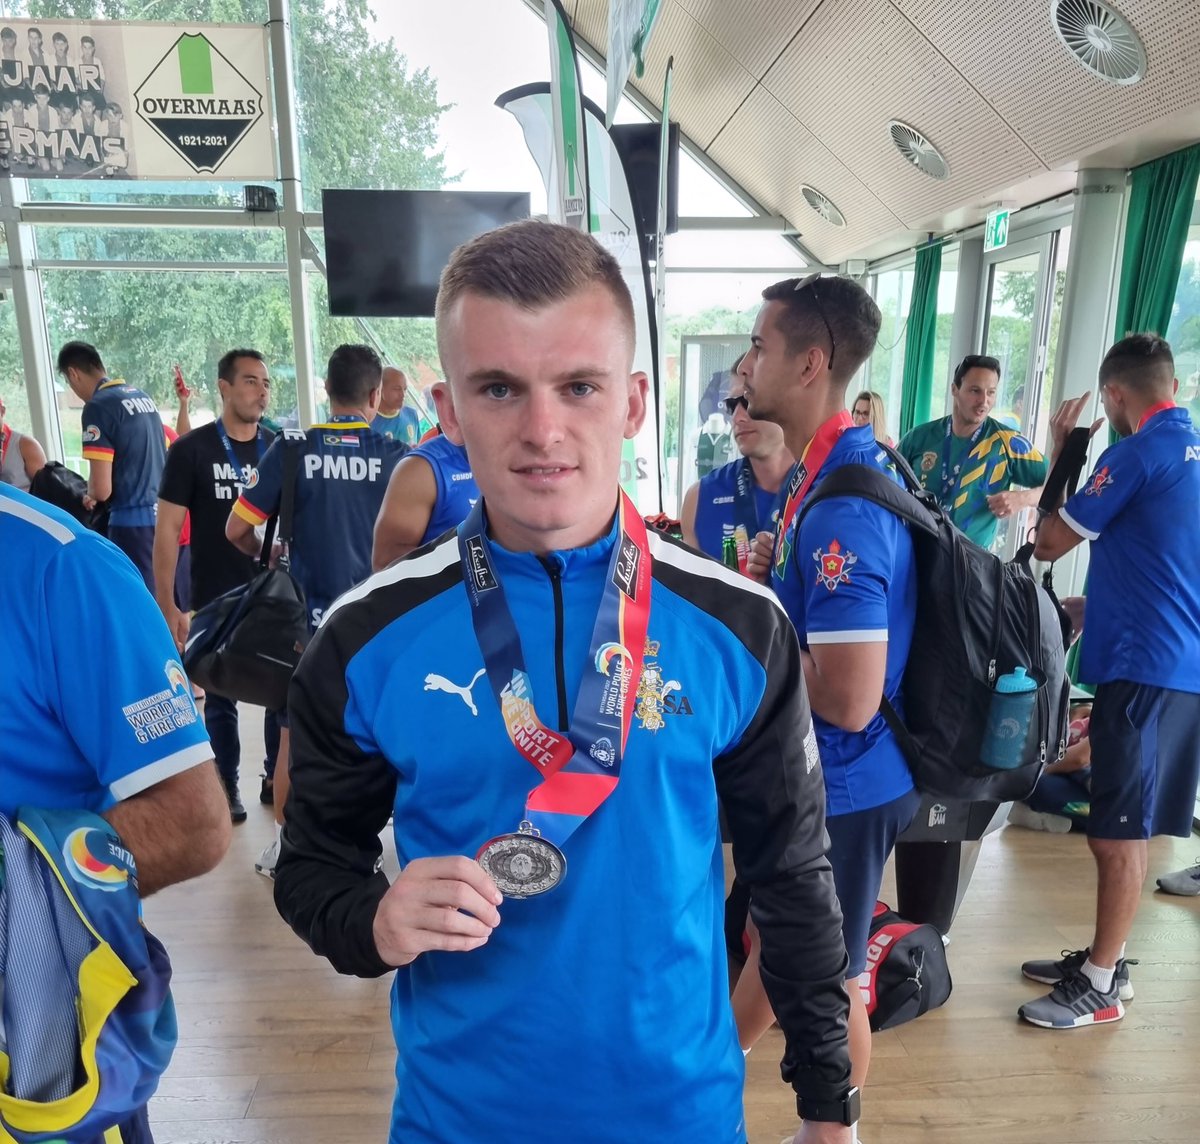 Well done to our Officer Charlie Young in representing HMPPS in the World Police and Fire games in Rotterdam. Coming runners up to the Brazil military police. You should all be really proud of your silver medal. Aim for gold next year in Canada 🥈⚽️